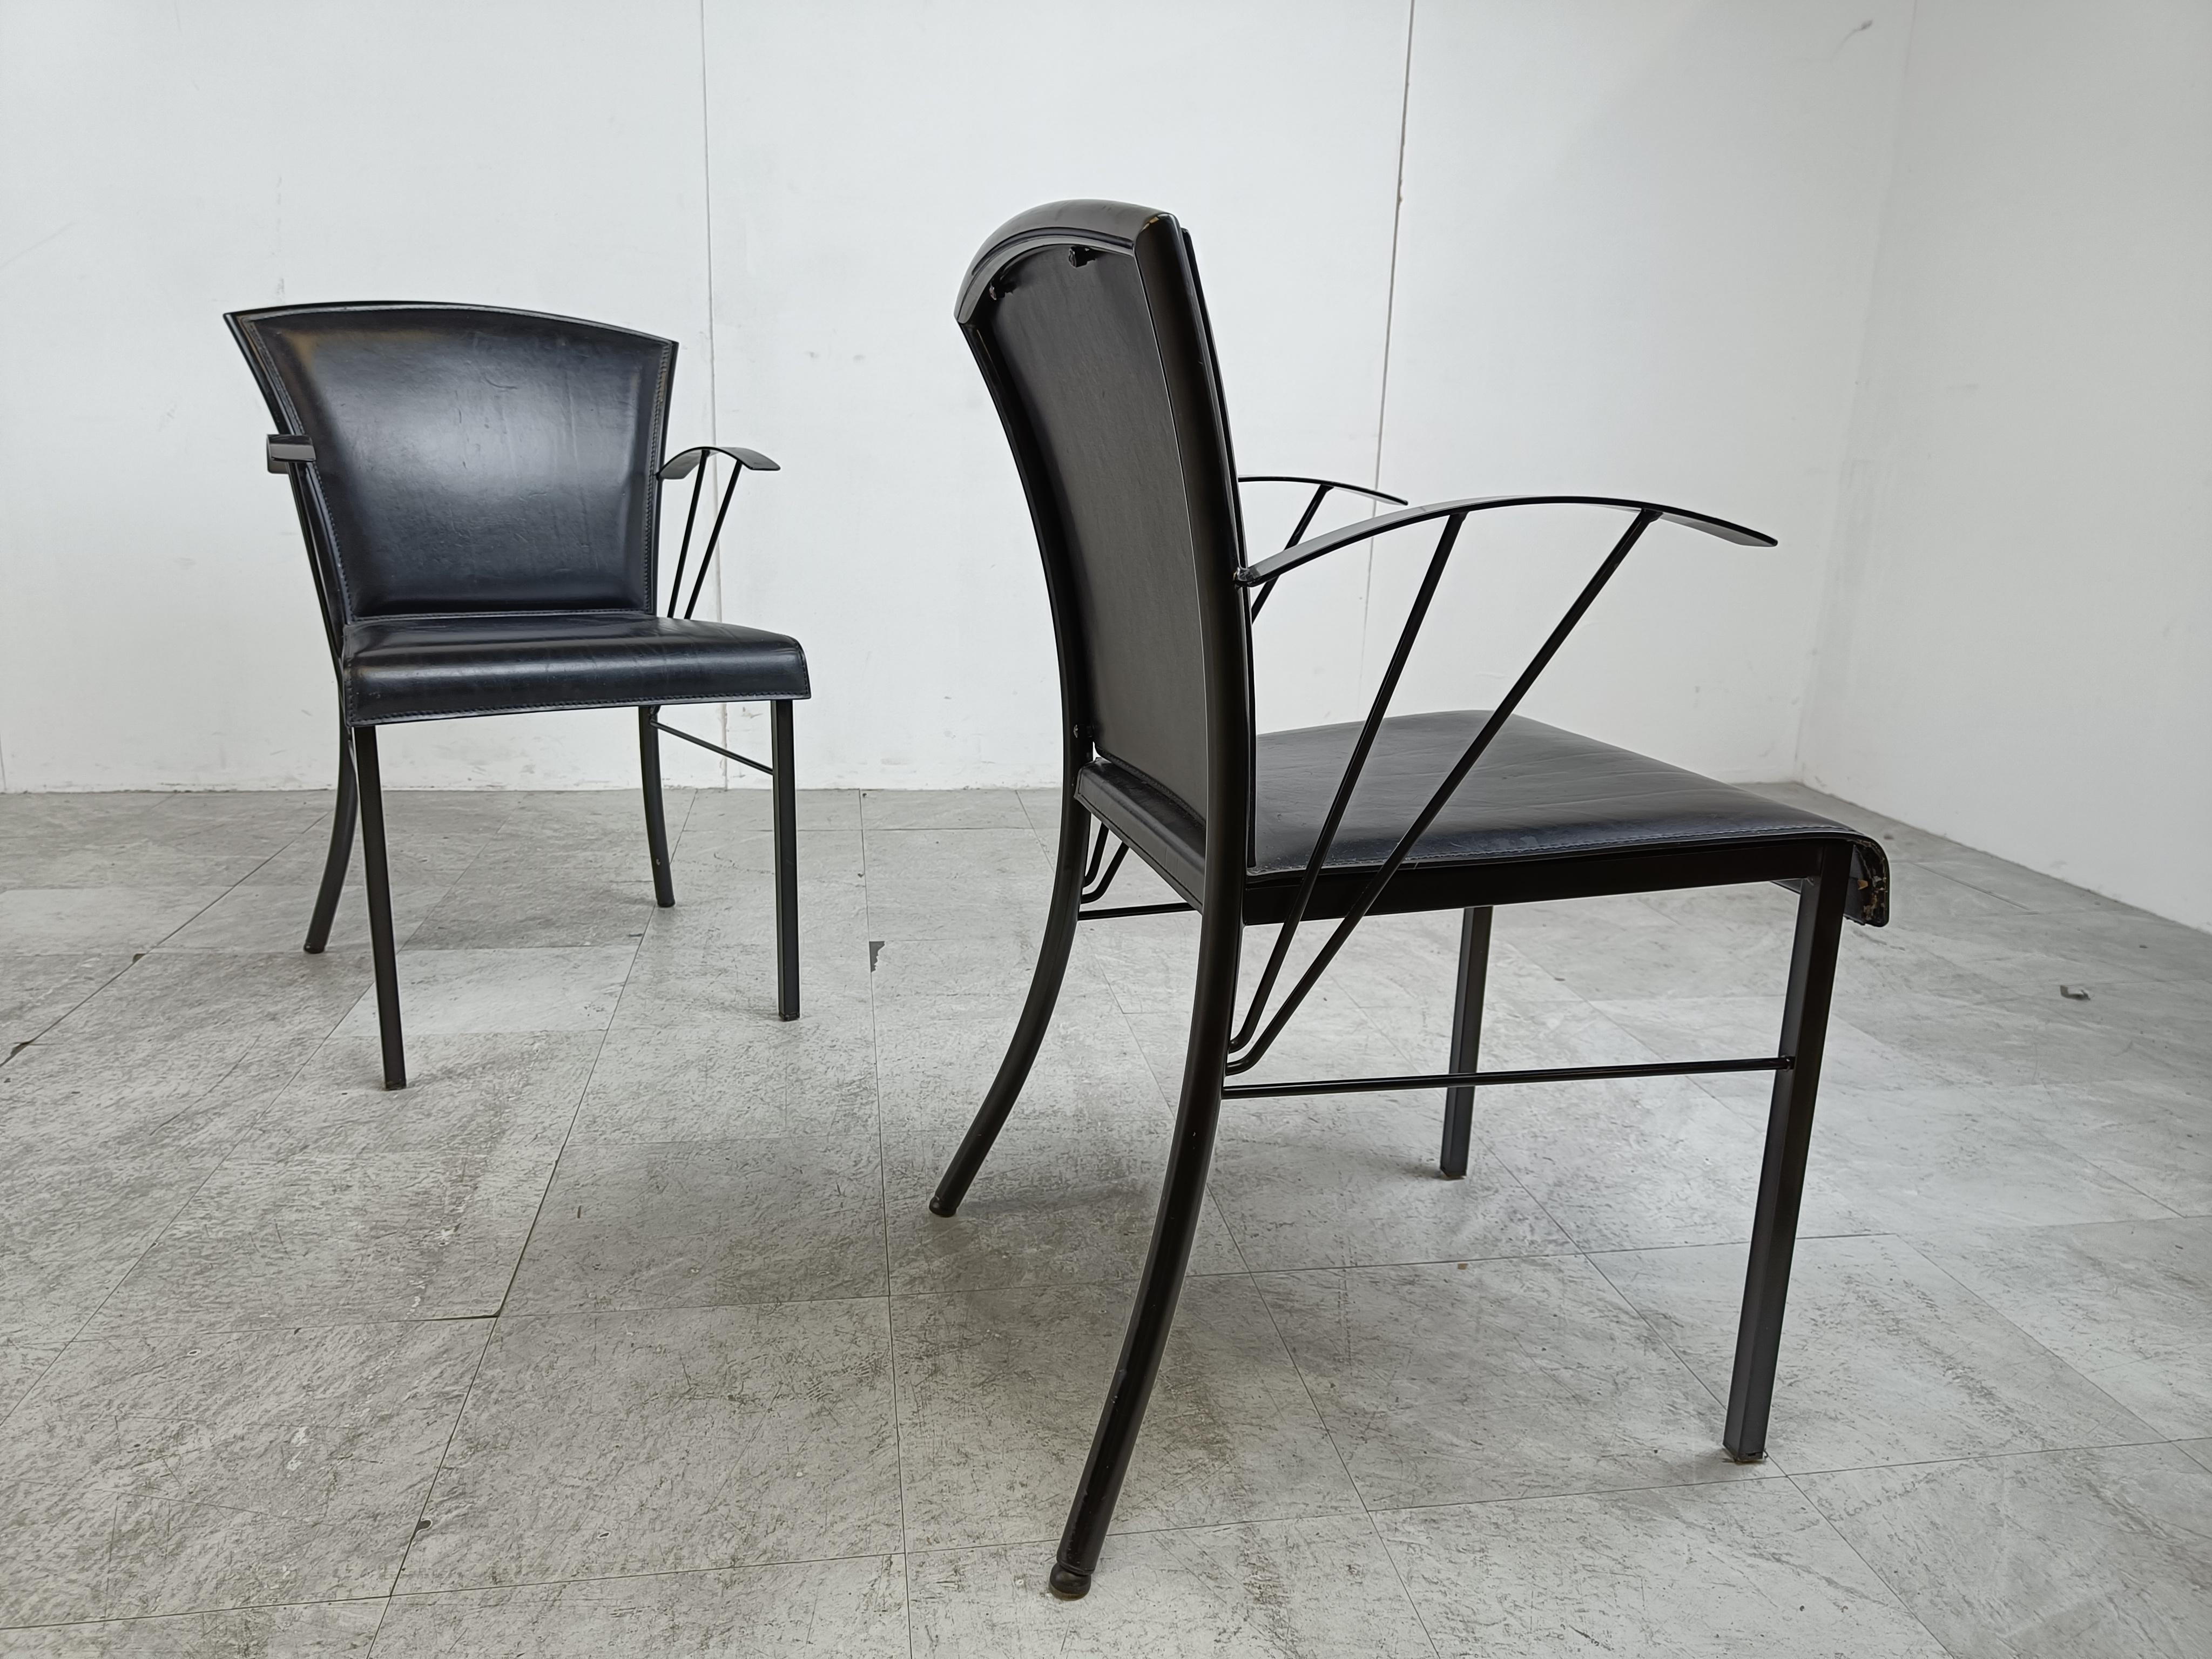 Vintage Black Leather Dining Chairs by Arrben, 1980s For Sale 3